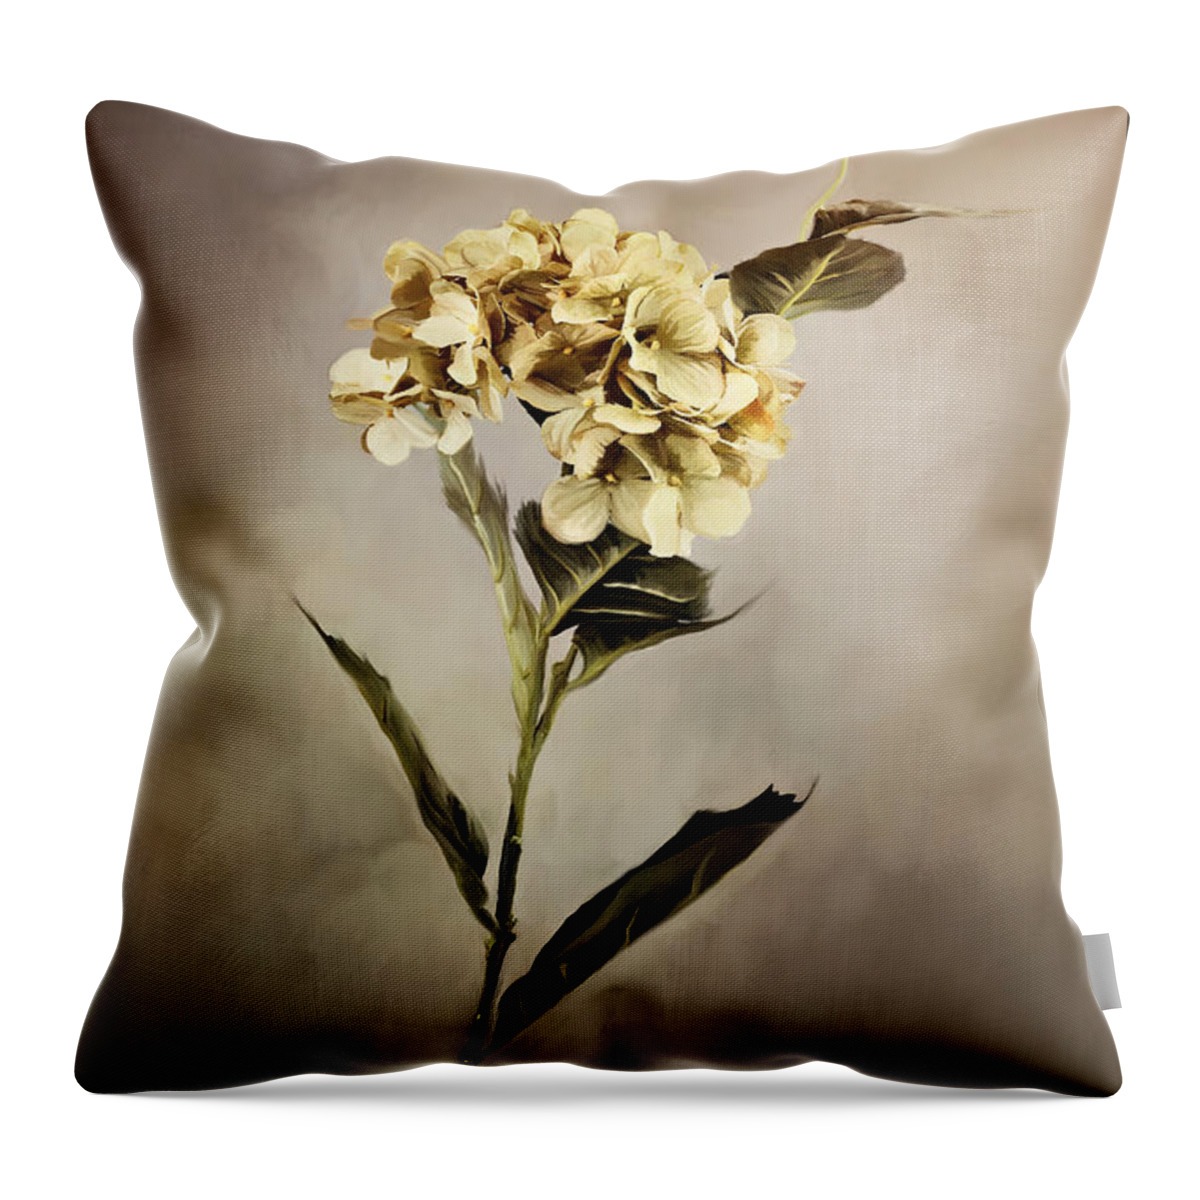 Hydrangea Throw Pillow featuring the photograph Painted Hydrangeas by Stephanie Frey